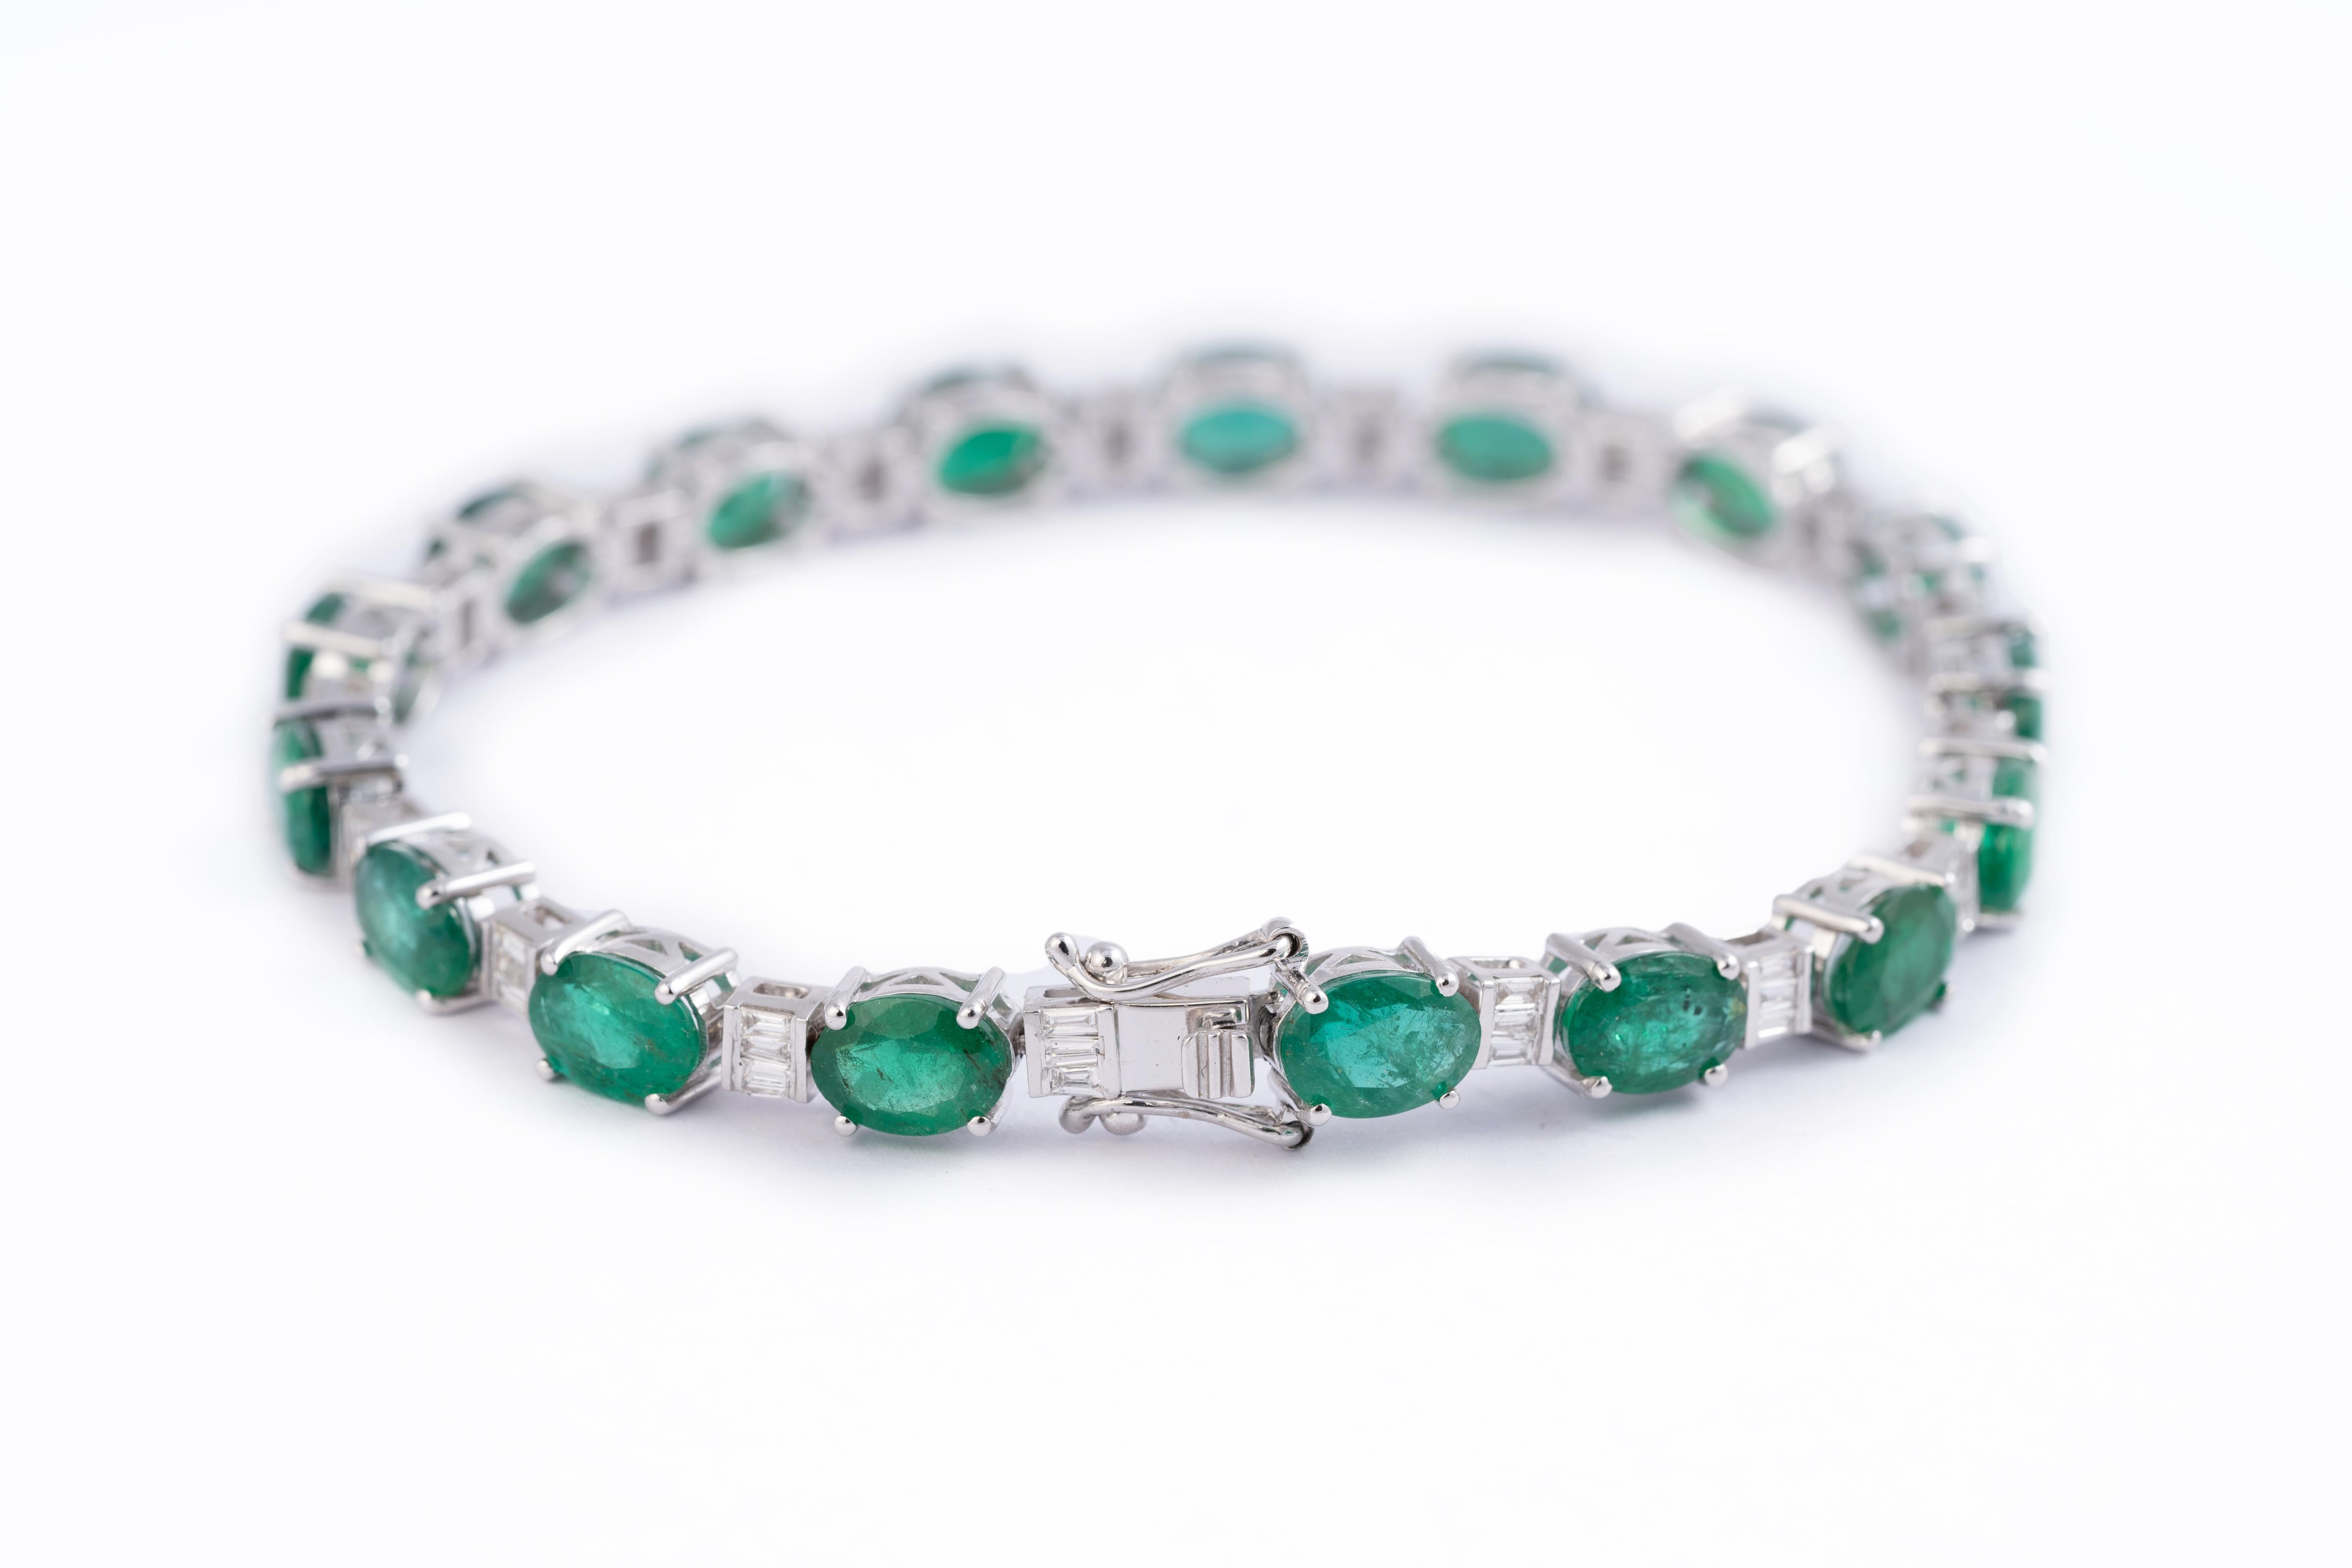 Emerald Cut 13.06 Carats Natural Zambian Emerald Tennis Bracelet with Diamonds and 14k Gold For Sale